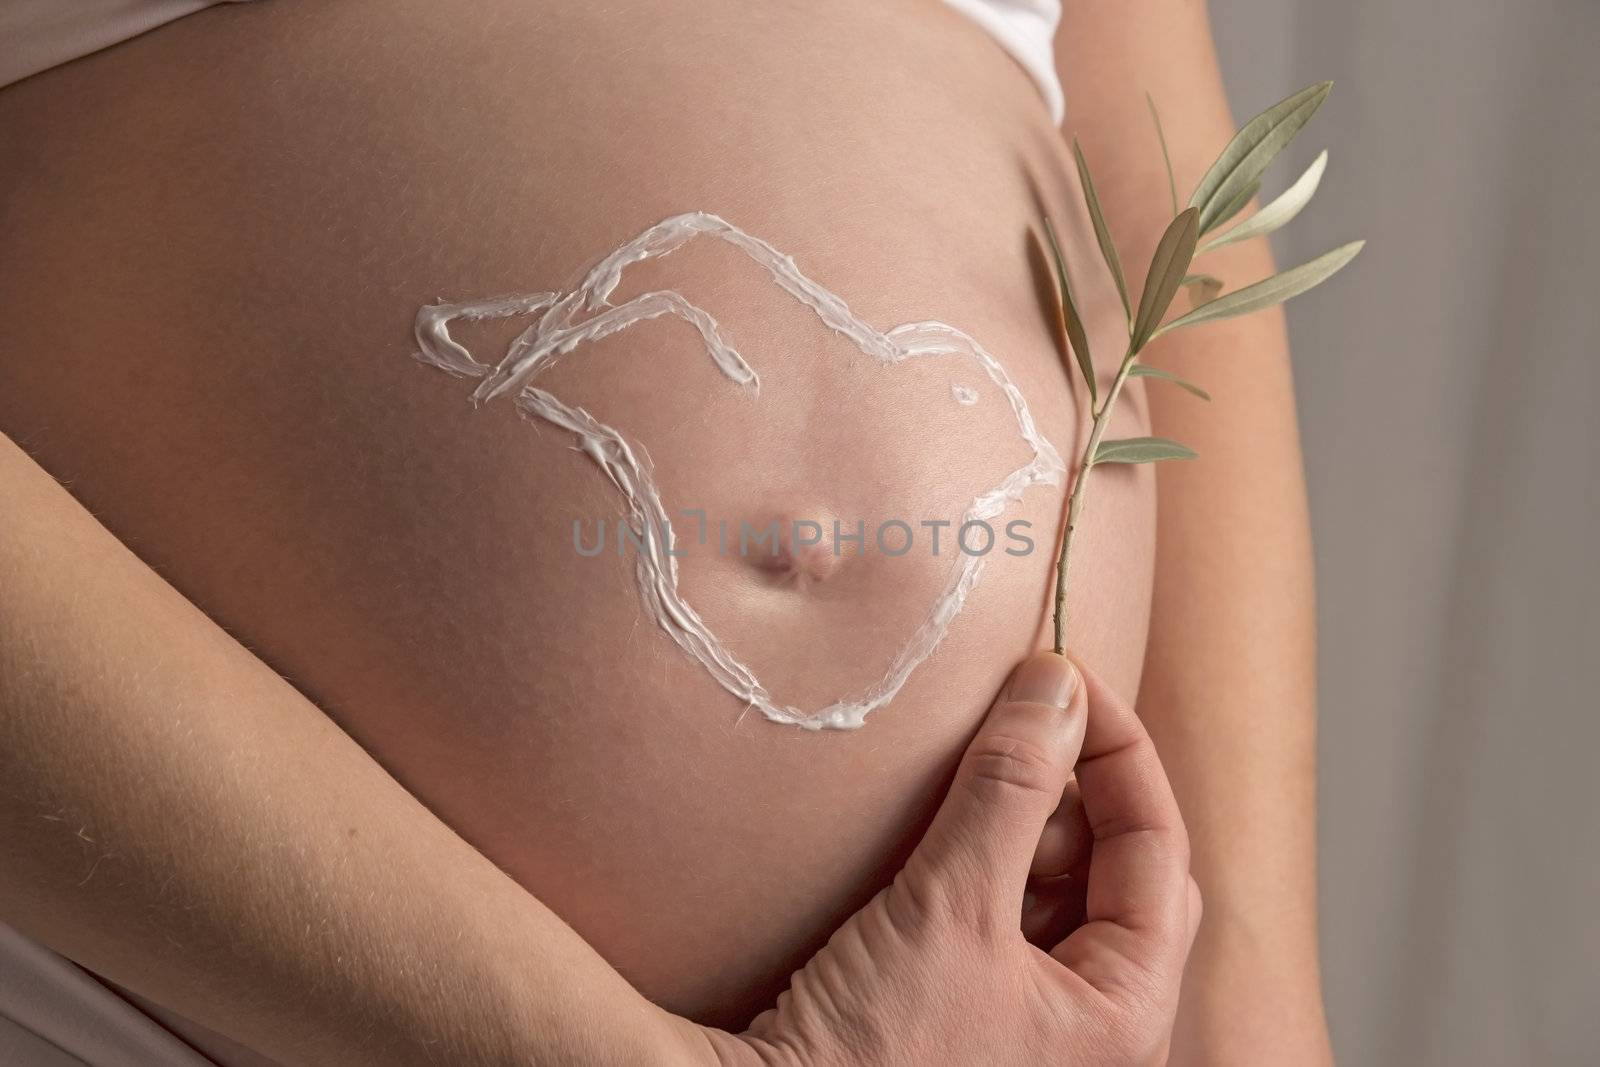 Pregnant woman is holding an olive branch on the creme pigeon of her baby bump